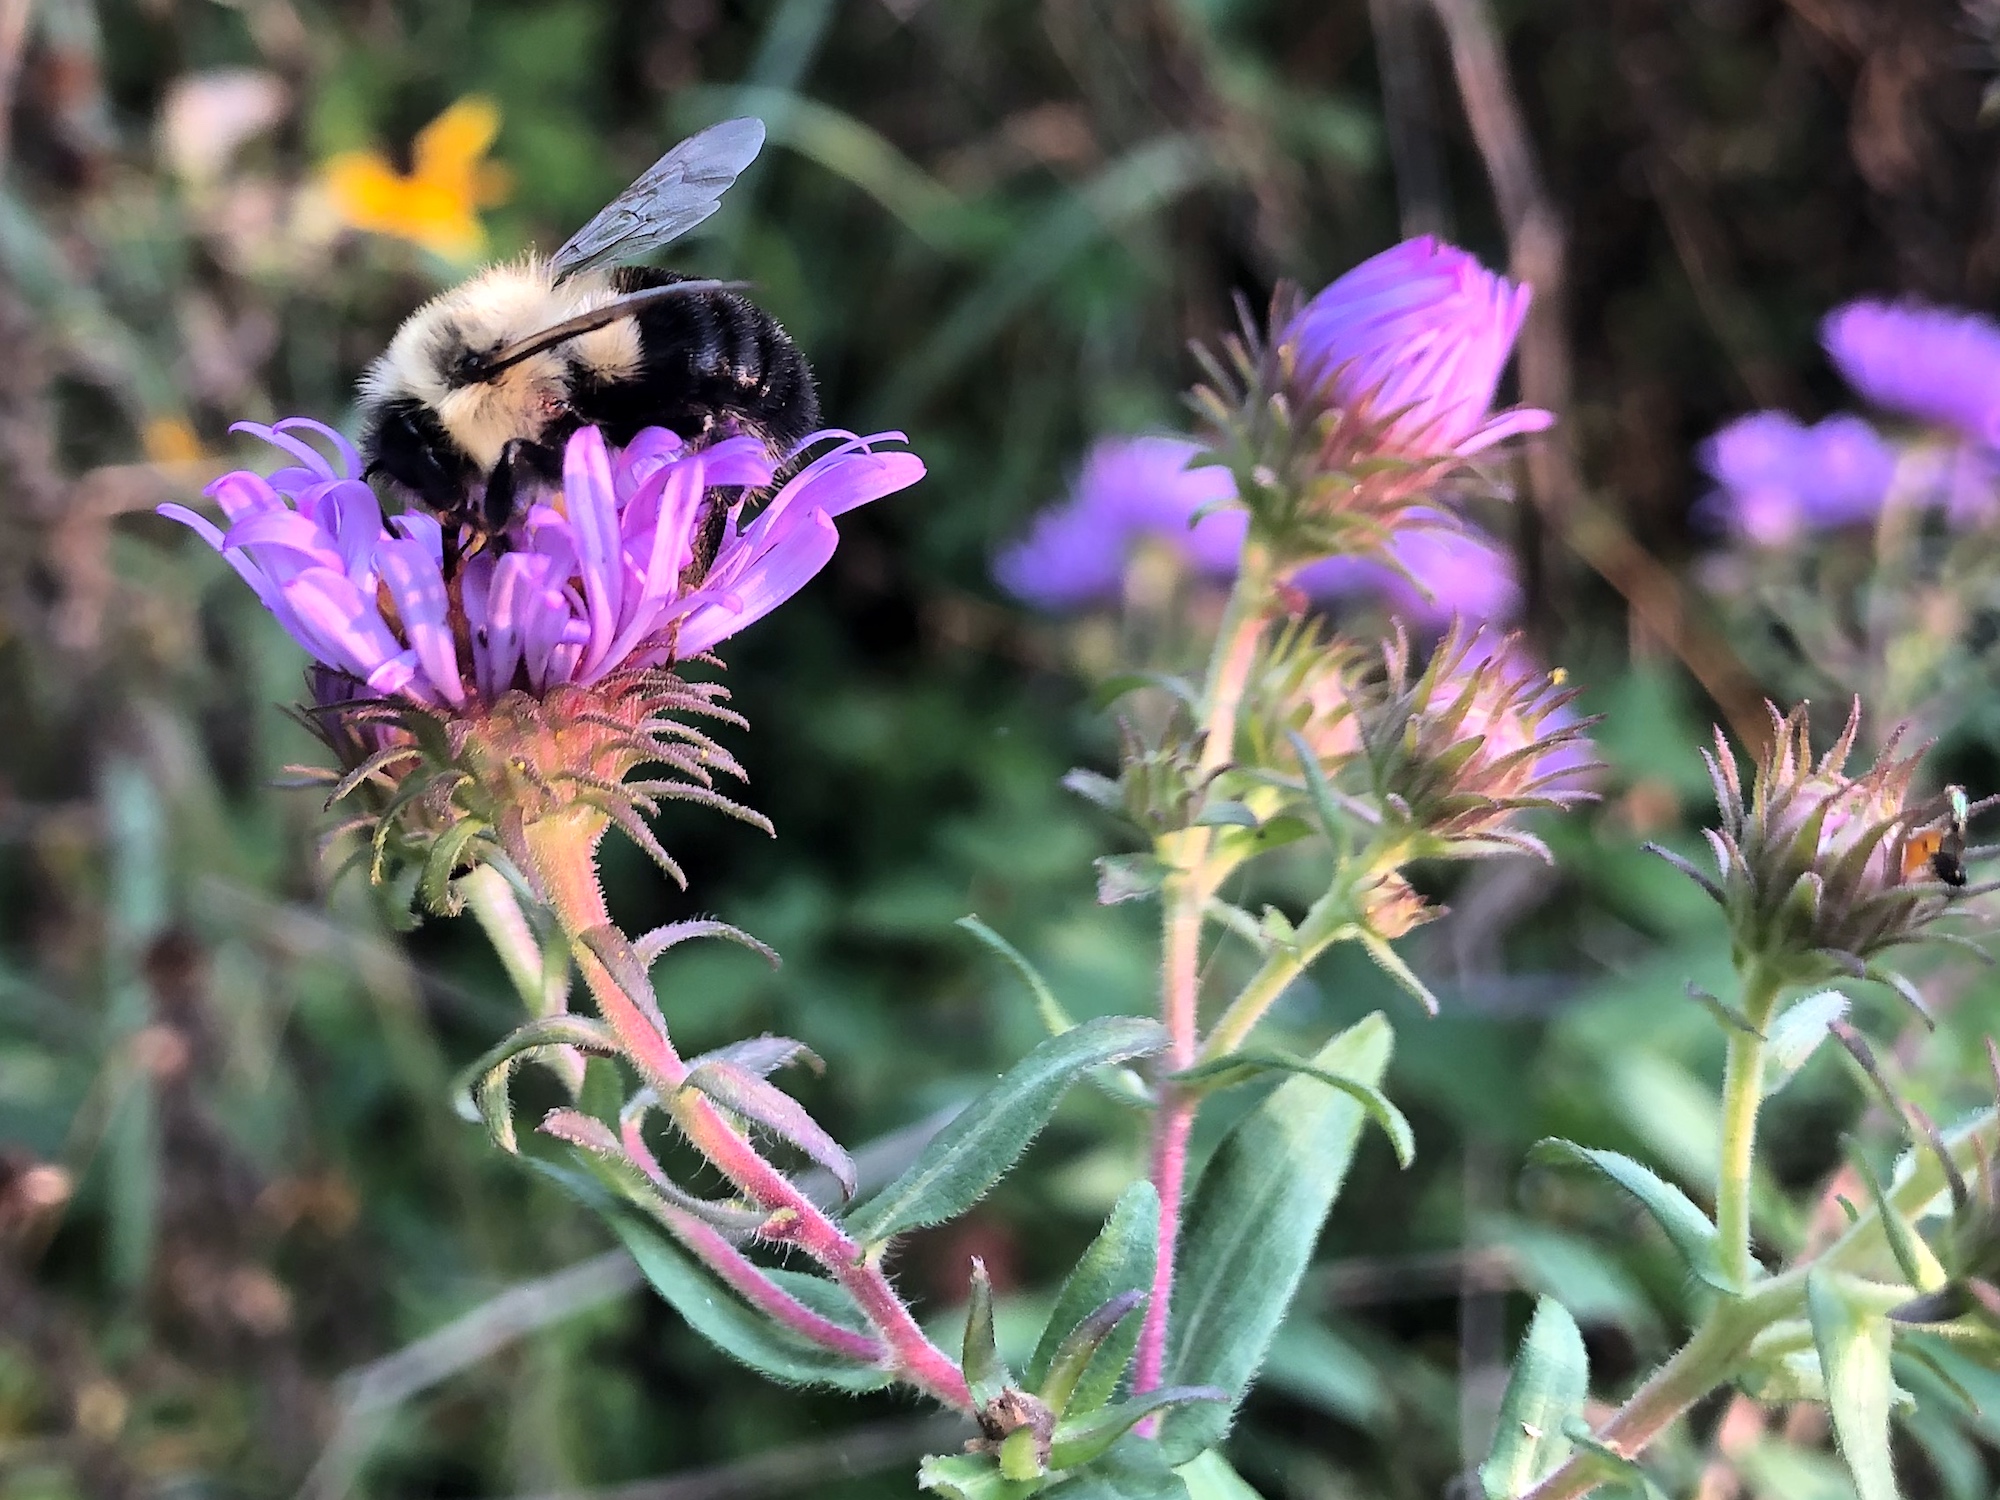 Bumblebee on Aster on September 16, 2020.